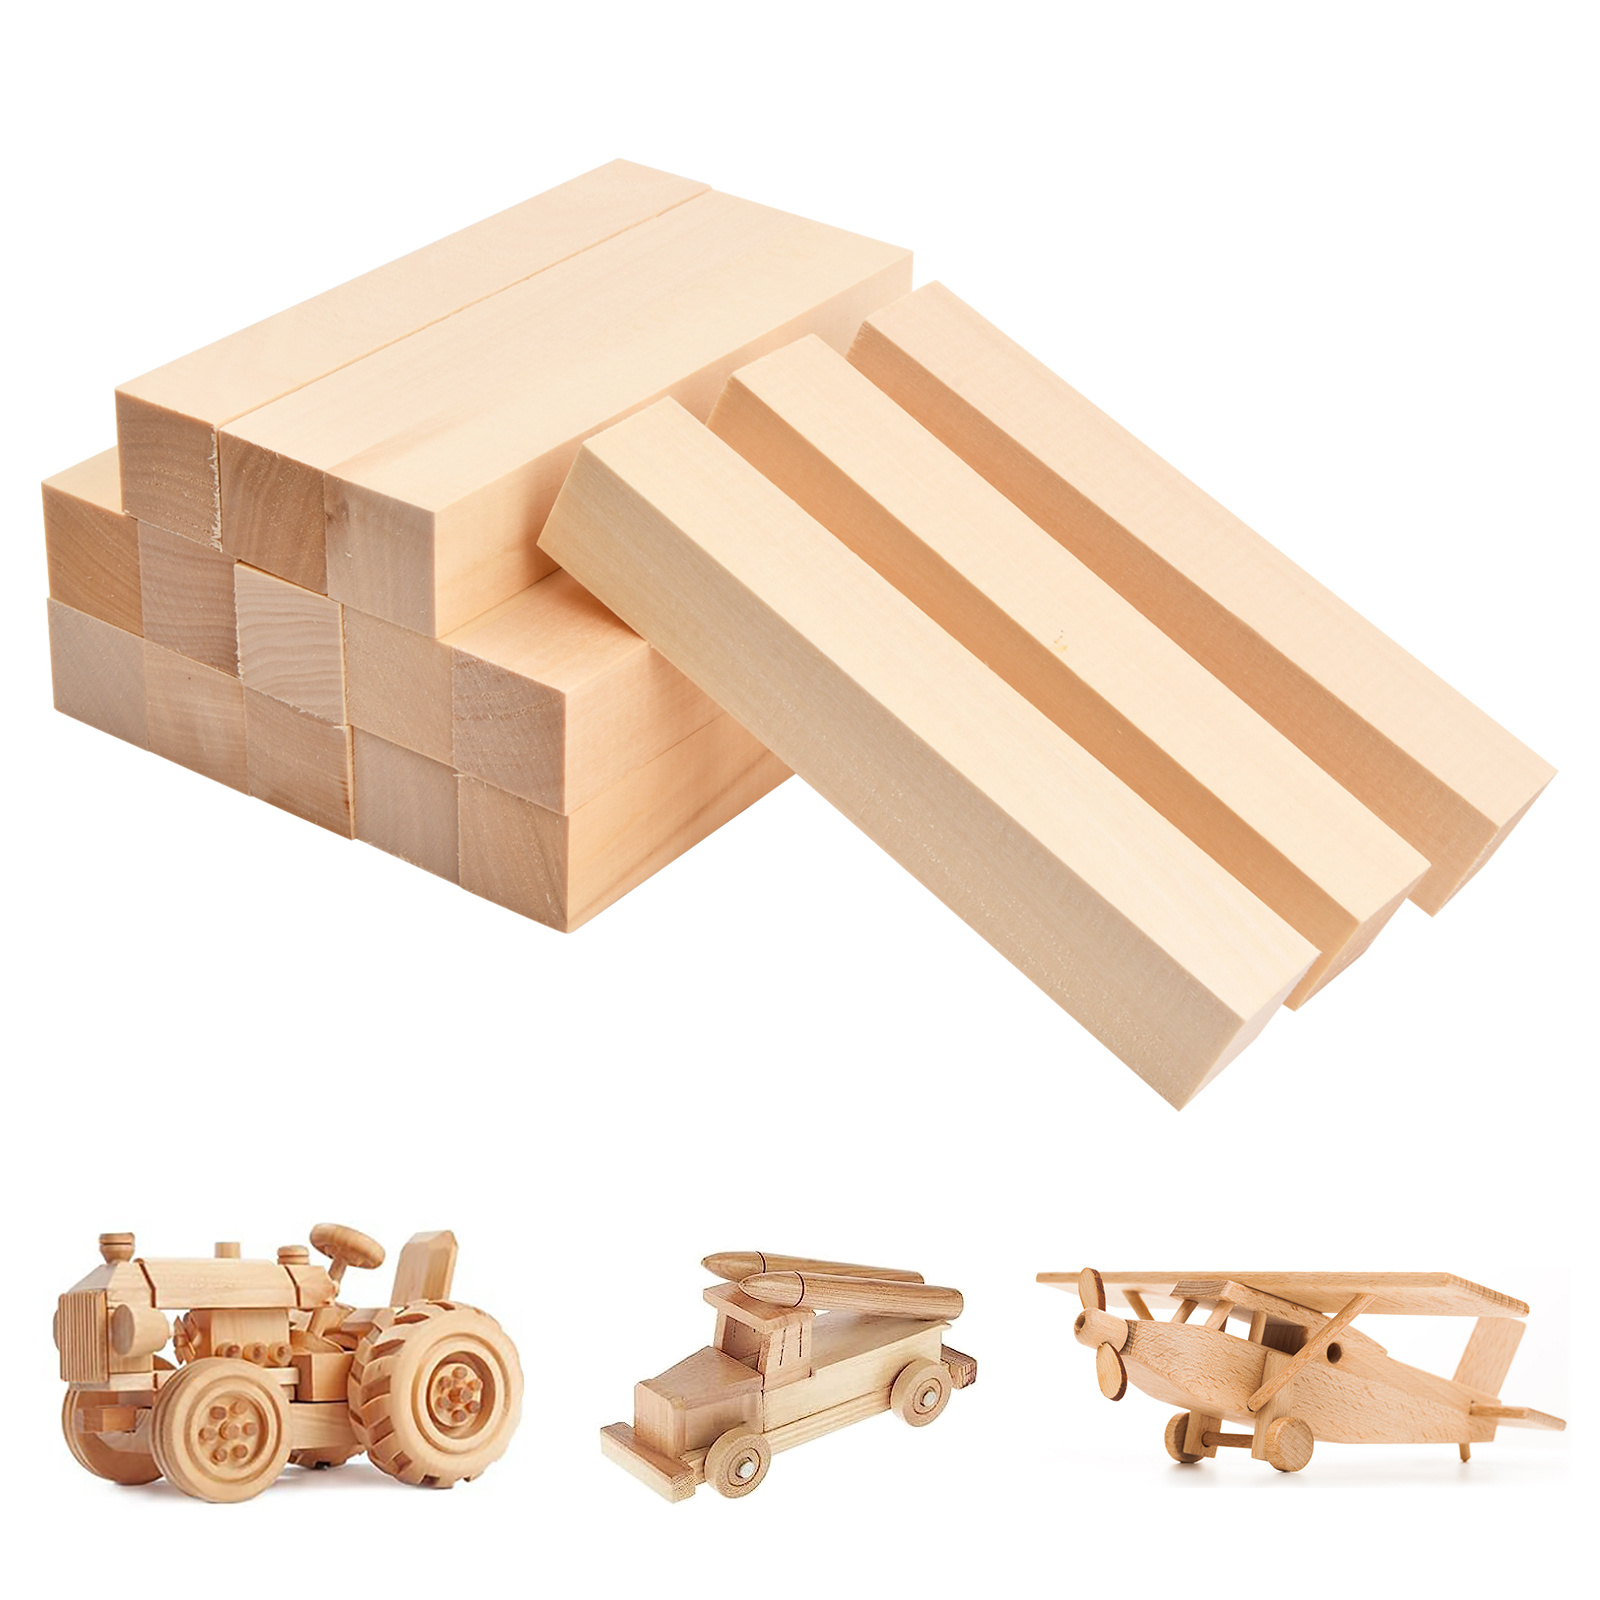 Large Carving Wood Blocks (10 Pack) 4 X 1 X 1 Inches Unfinished Basswood  Project Craft Kit Diy Hobb-dt